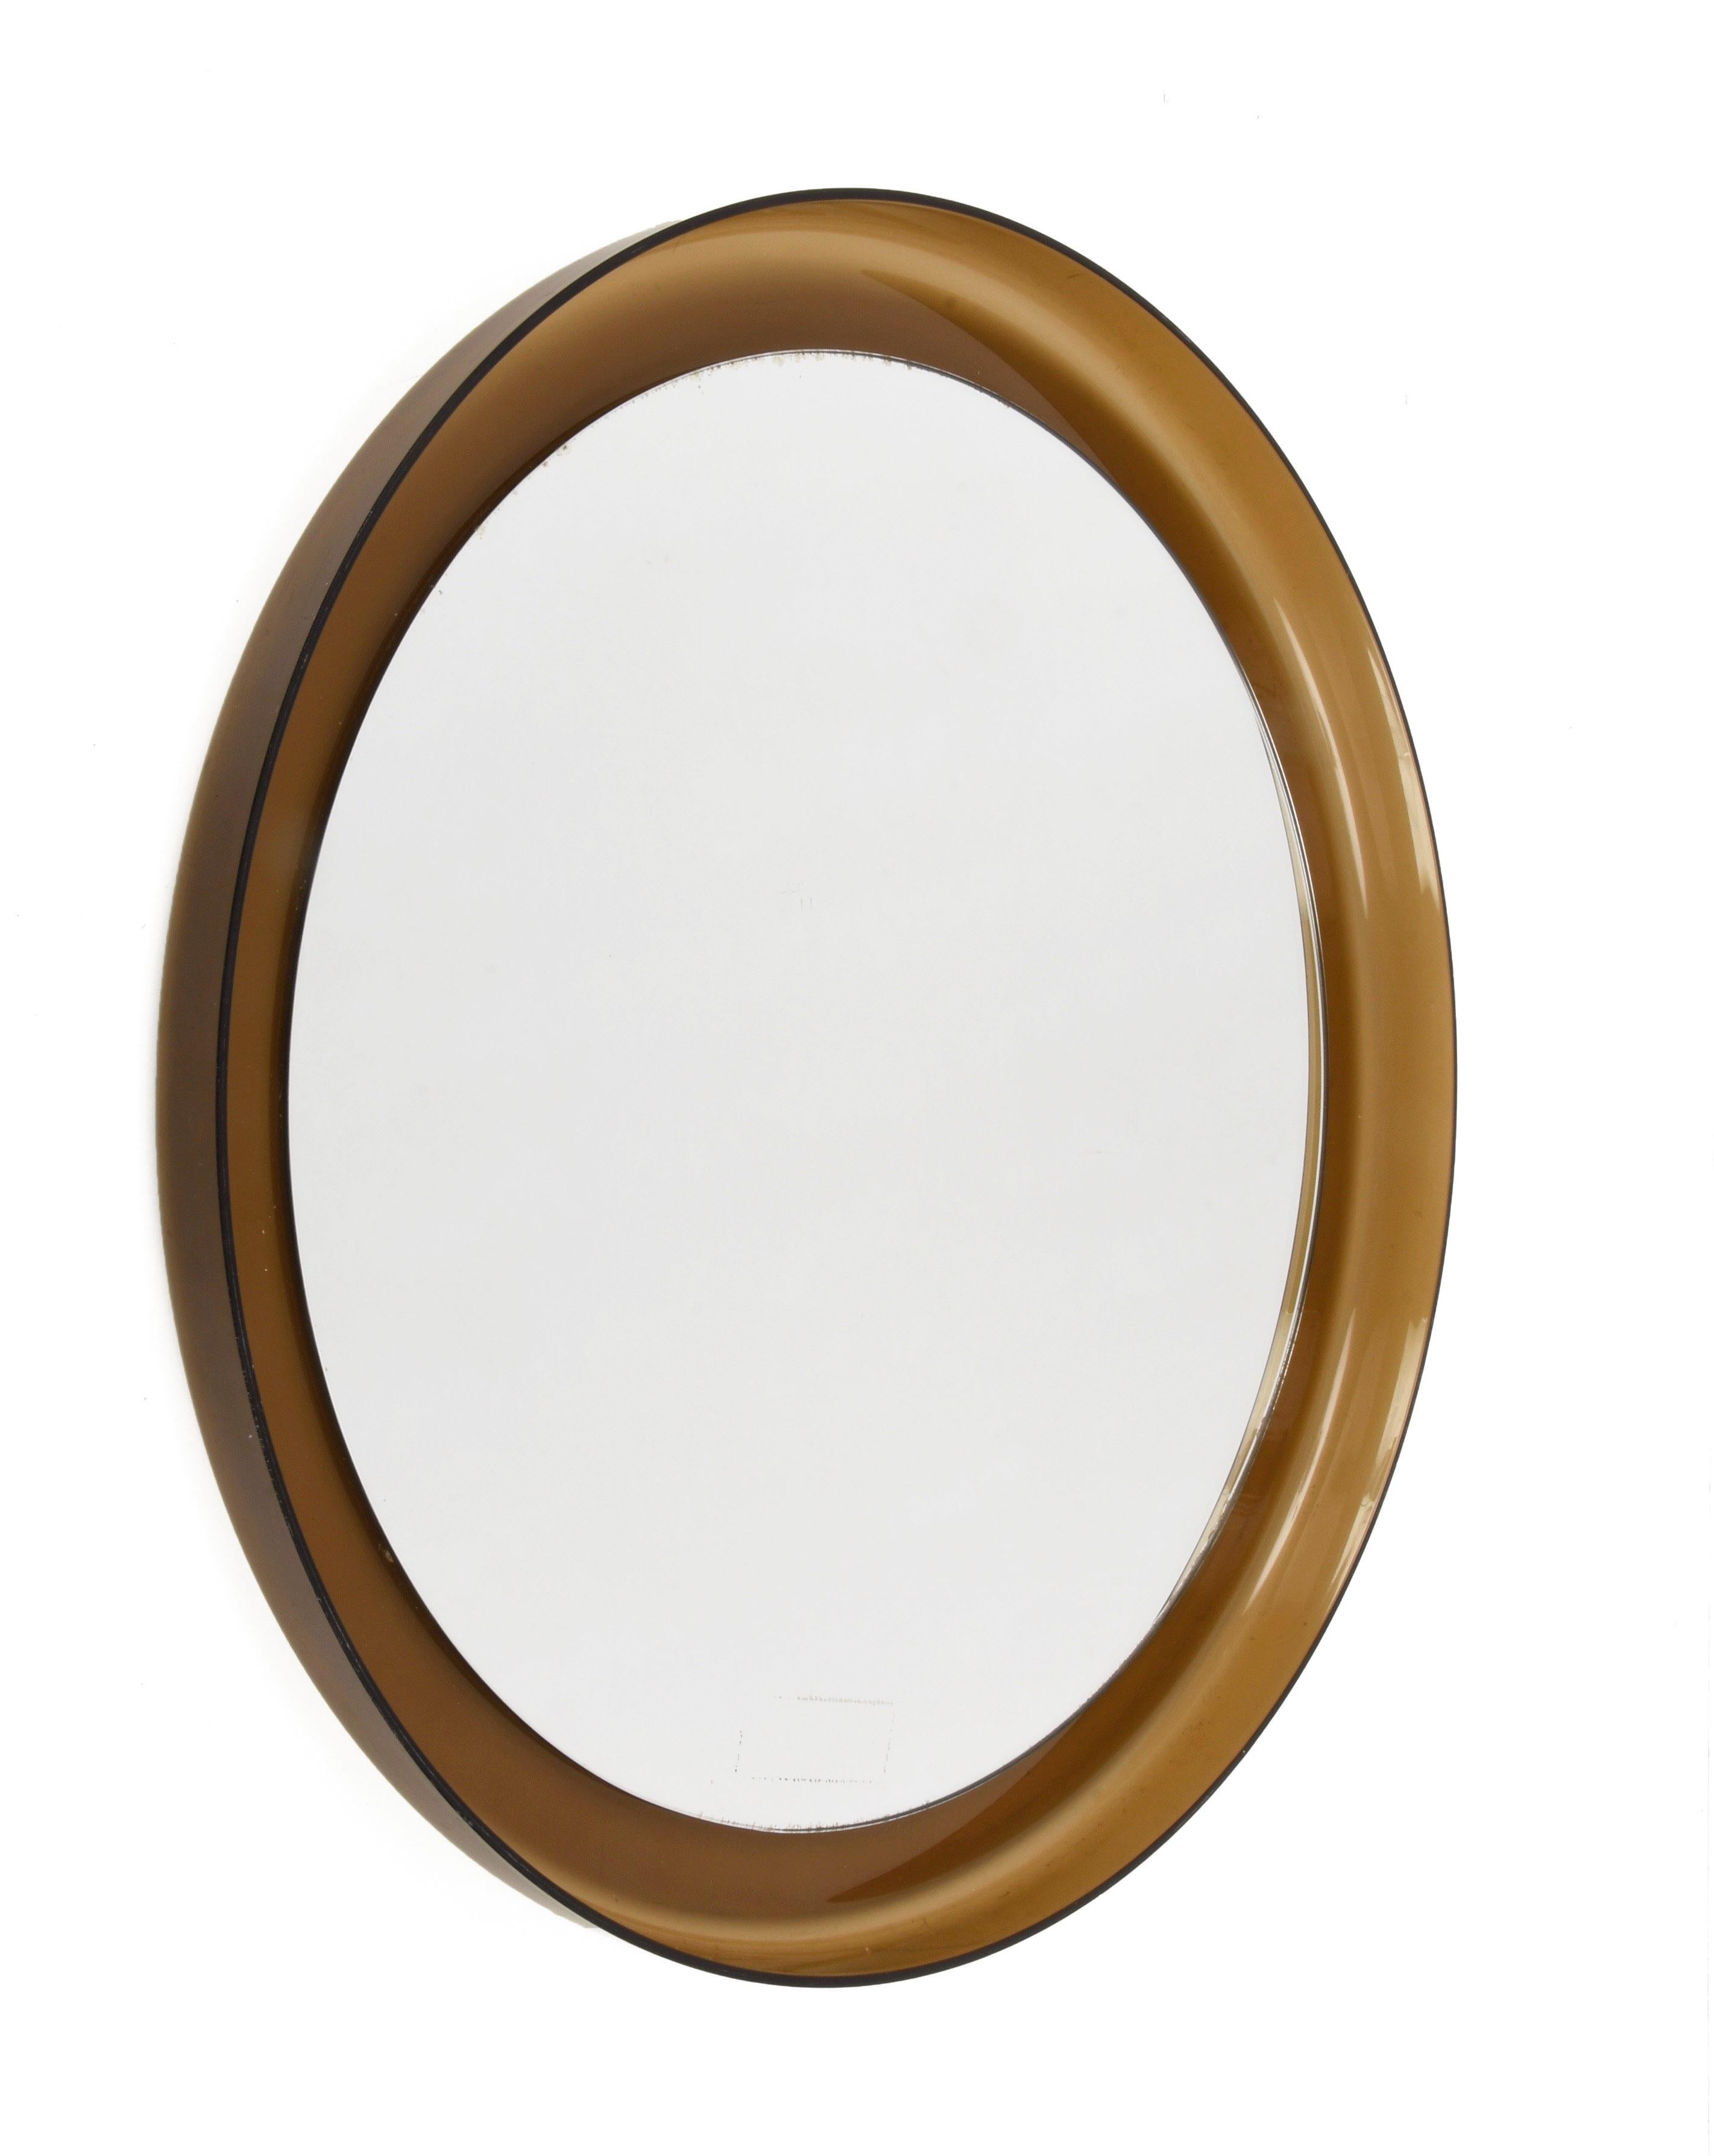 Steel Midcentury Guzzini Italian Round Lucite Smoked Brown Wall Mirror, 1960s For Sale